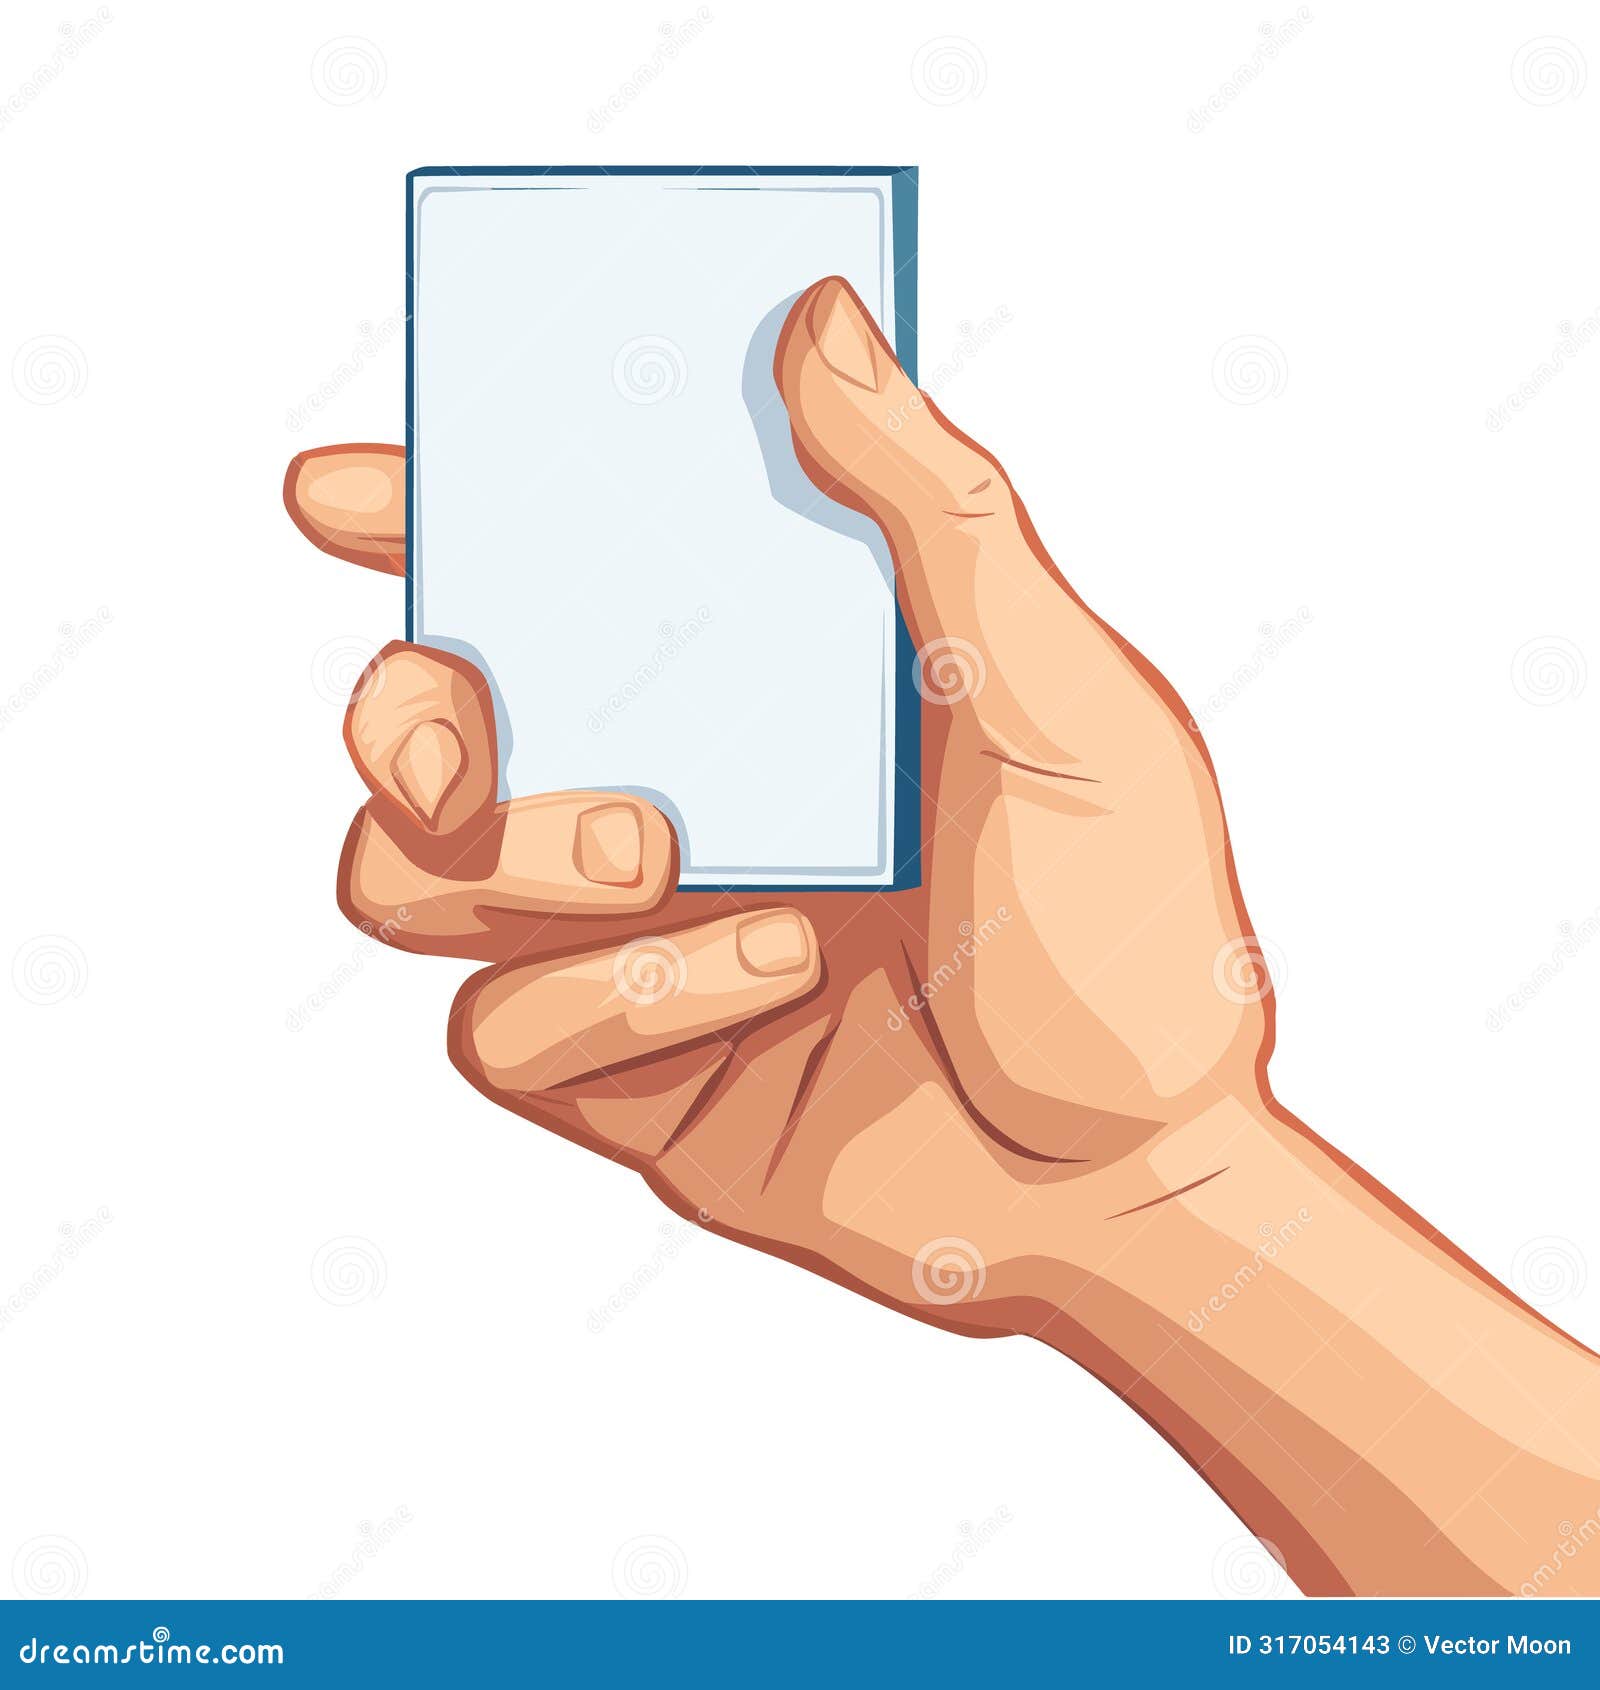 hand holding blank card, closeup fingers gripping card, palm presenting empty space text 